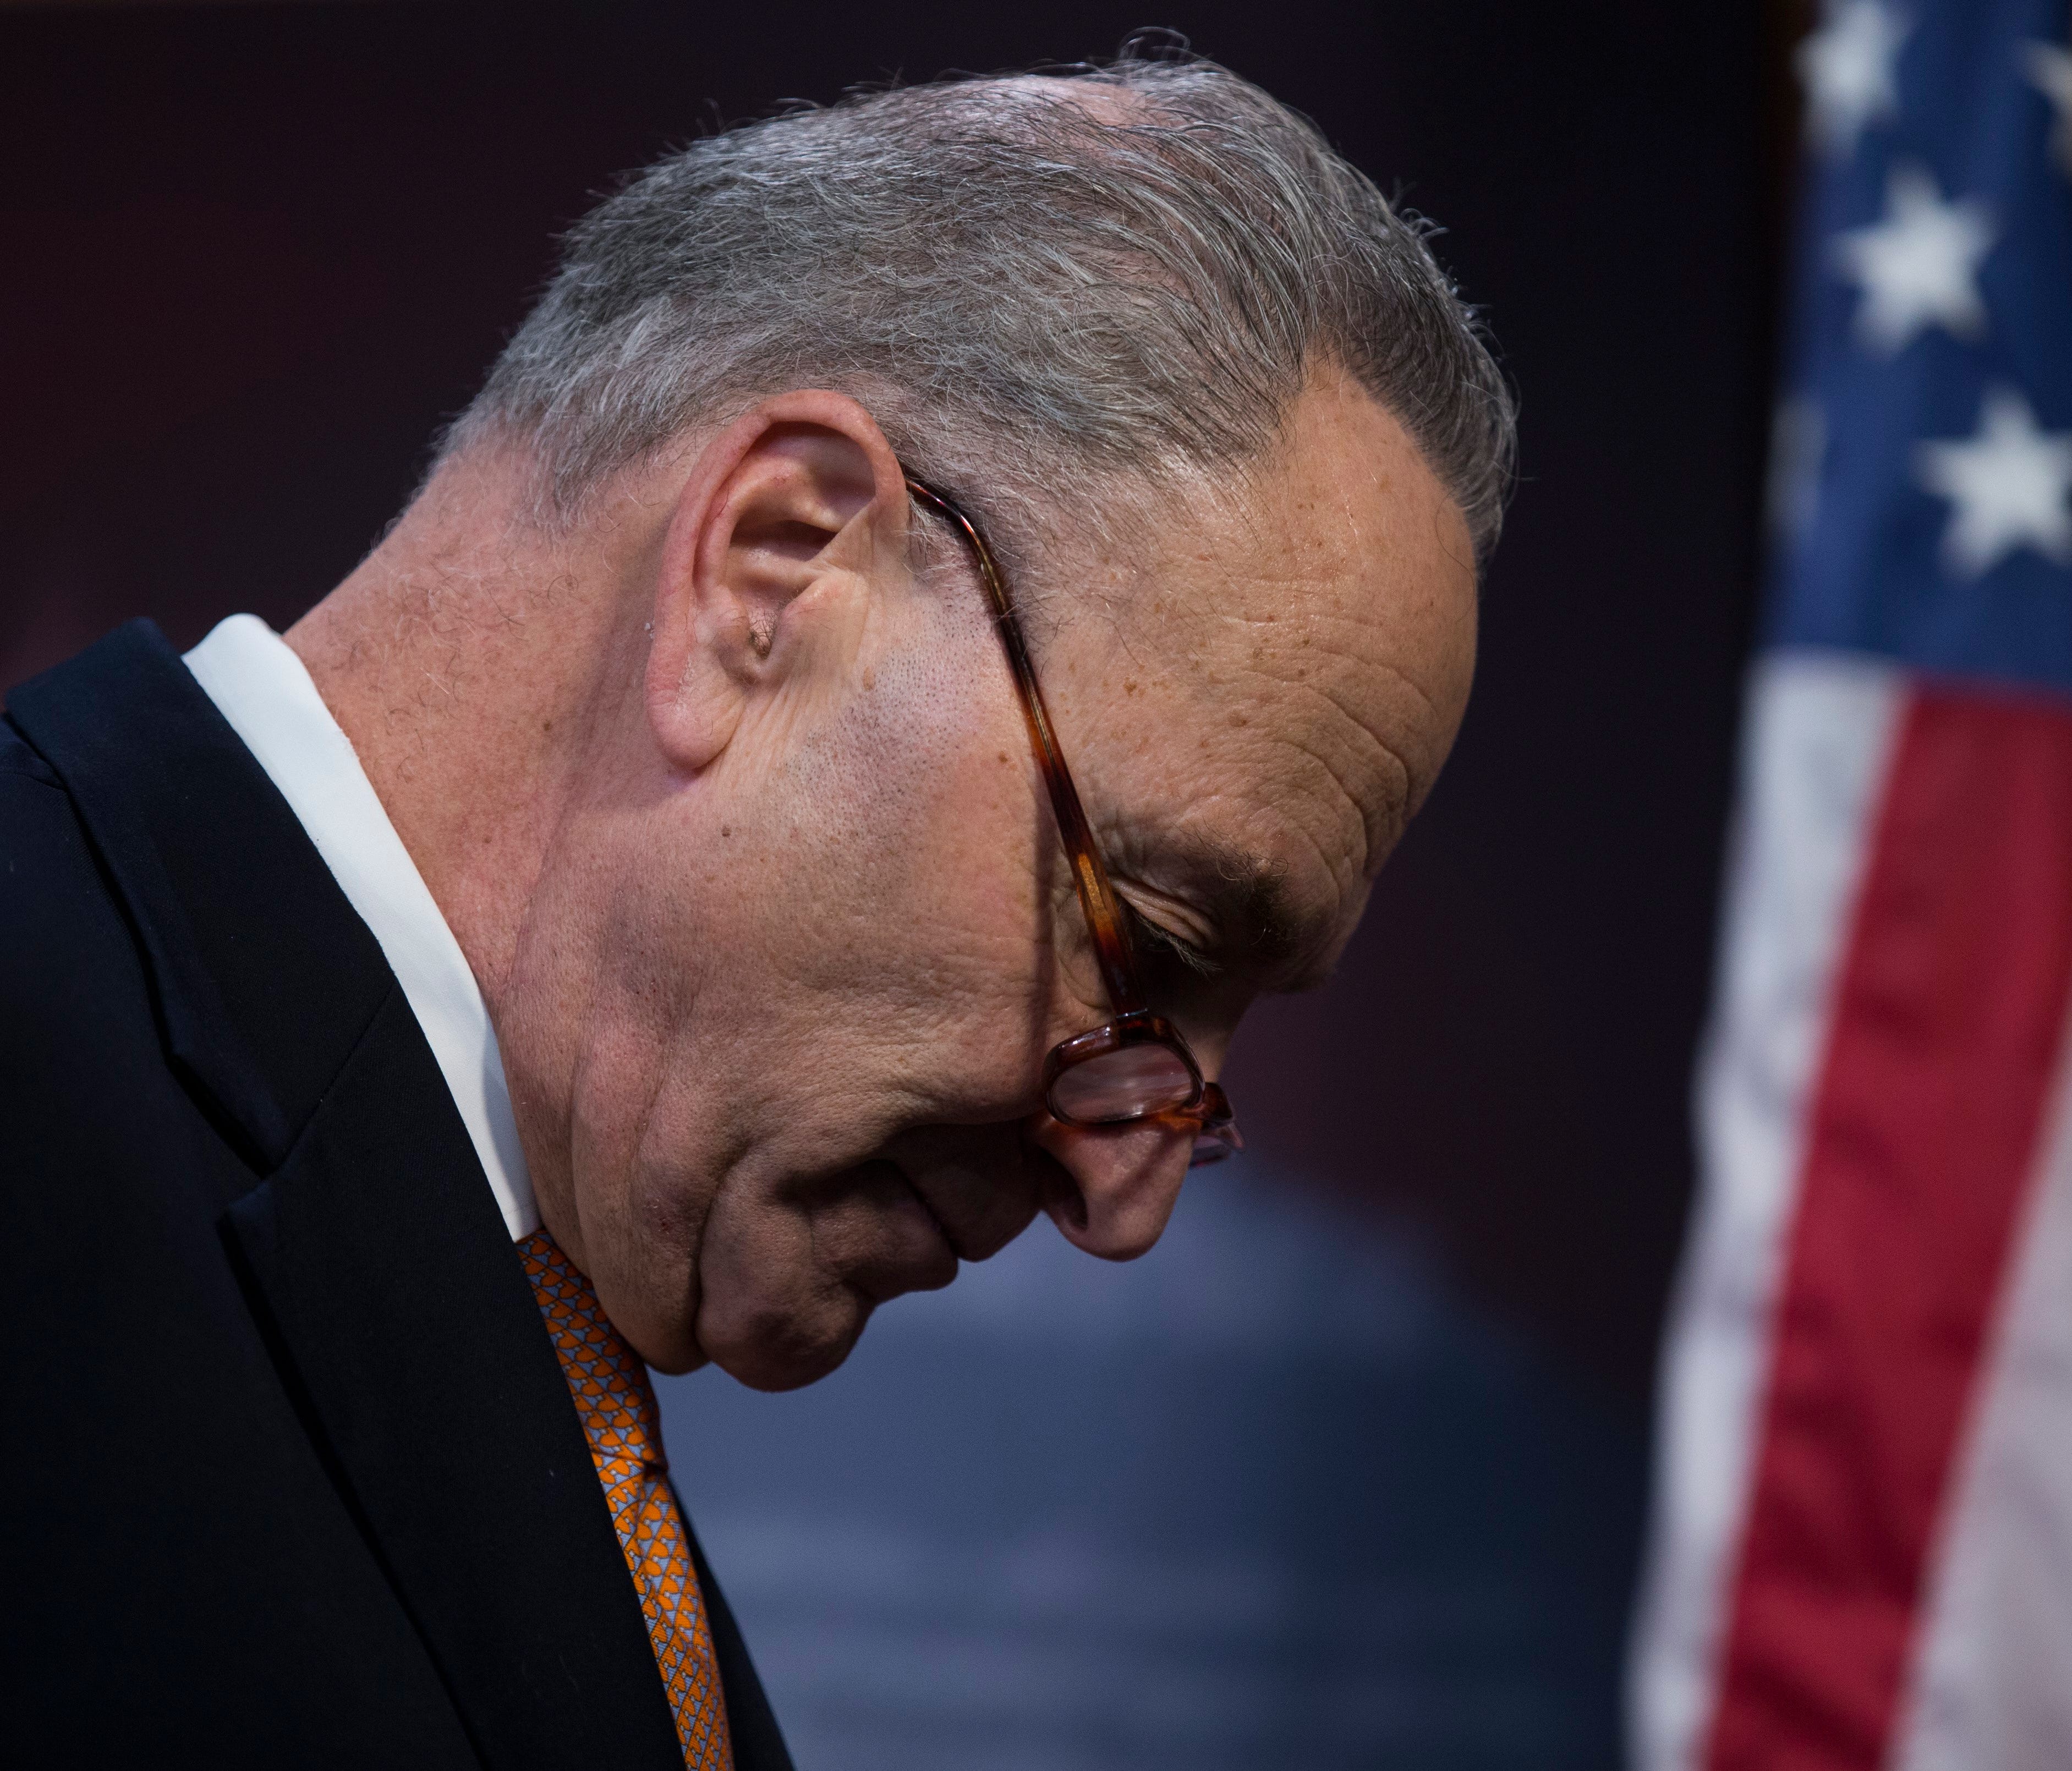 Senate Minority Leader Chuck Schumer walks from the podium after a press conference as the Senate continues work on ending the government shutdown in the US Capitol in Washington, DC, USA, 20 January 2018. Negotiations continue in the Senate today to